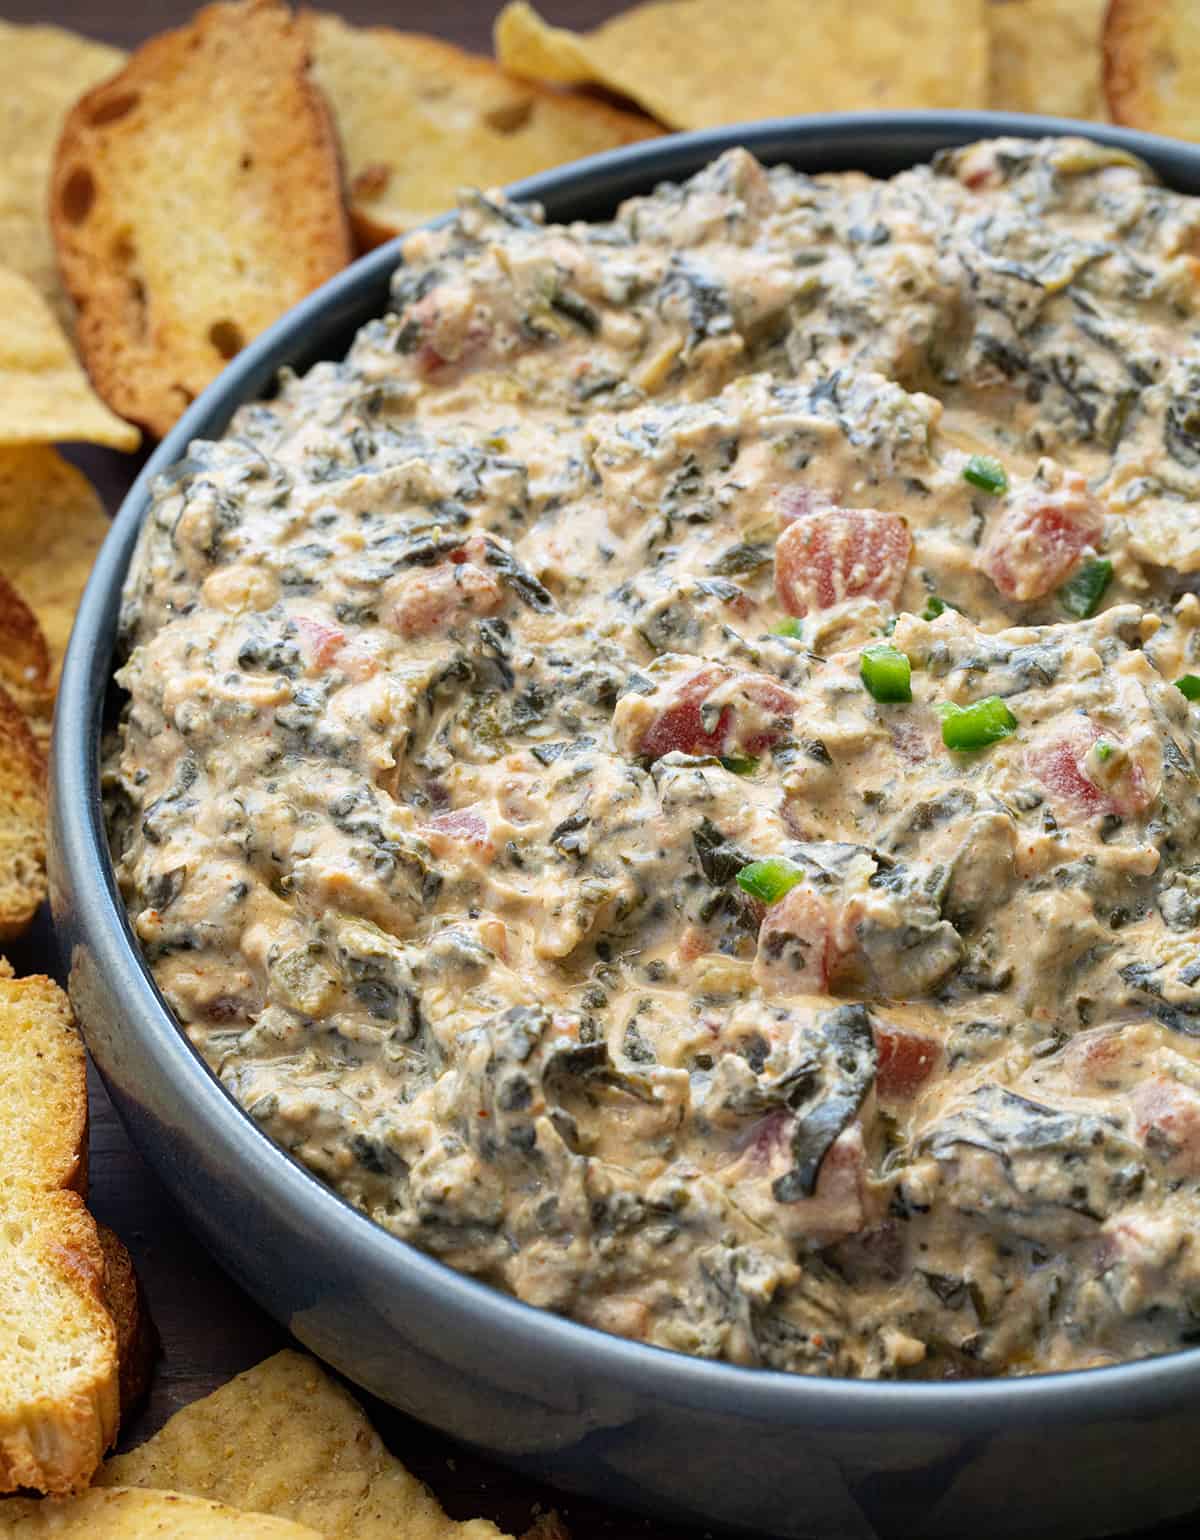 Close up of a Bowl of Fiesta Spinach Dip with Crackers.